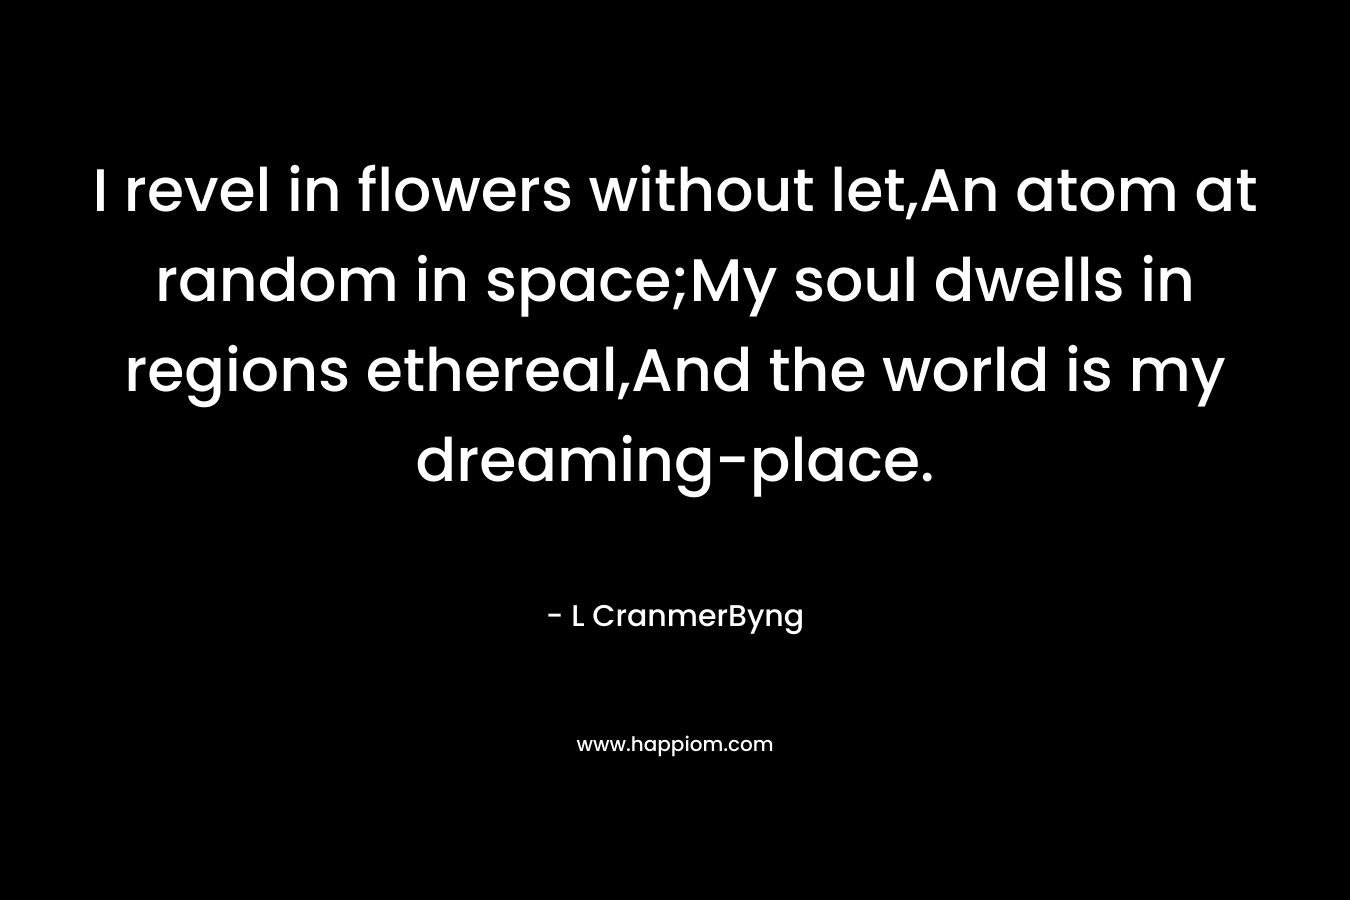 I revel in flowers without let,An atom at random in space;My soul dwells in regions ethereal,And the world is my dreaming-place. – L CranmerByng